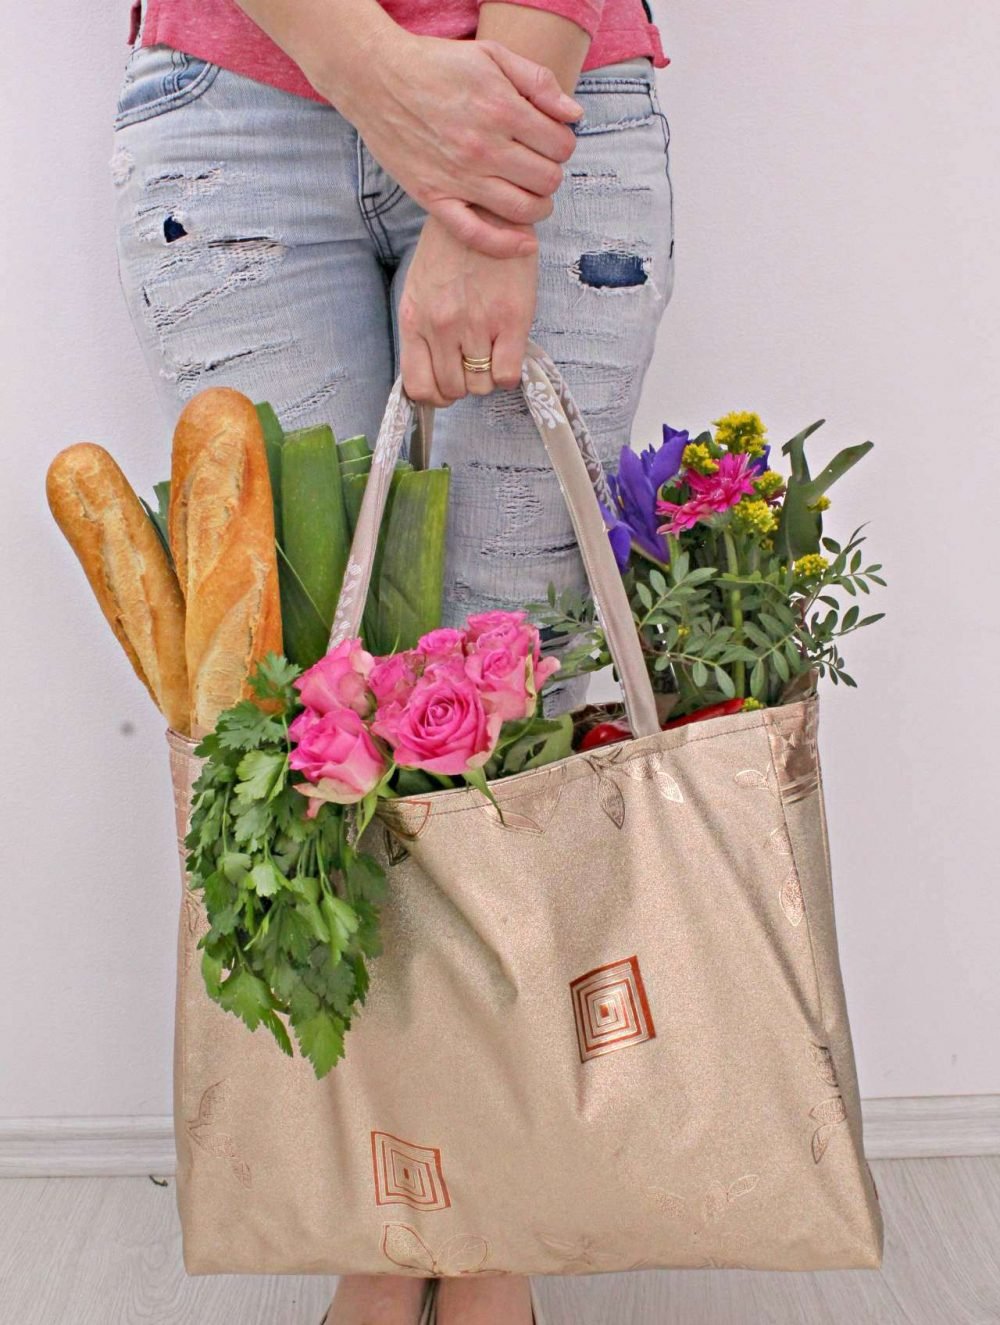 Shopping bag pattern for a vinyl tote bag, filled with flowers herbs and bread